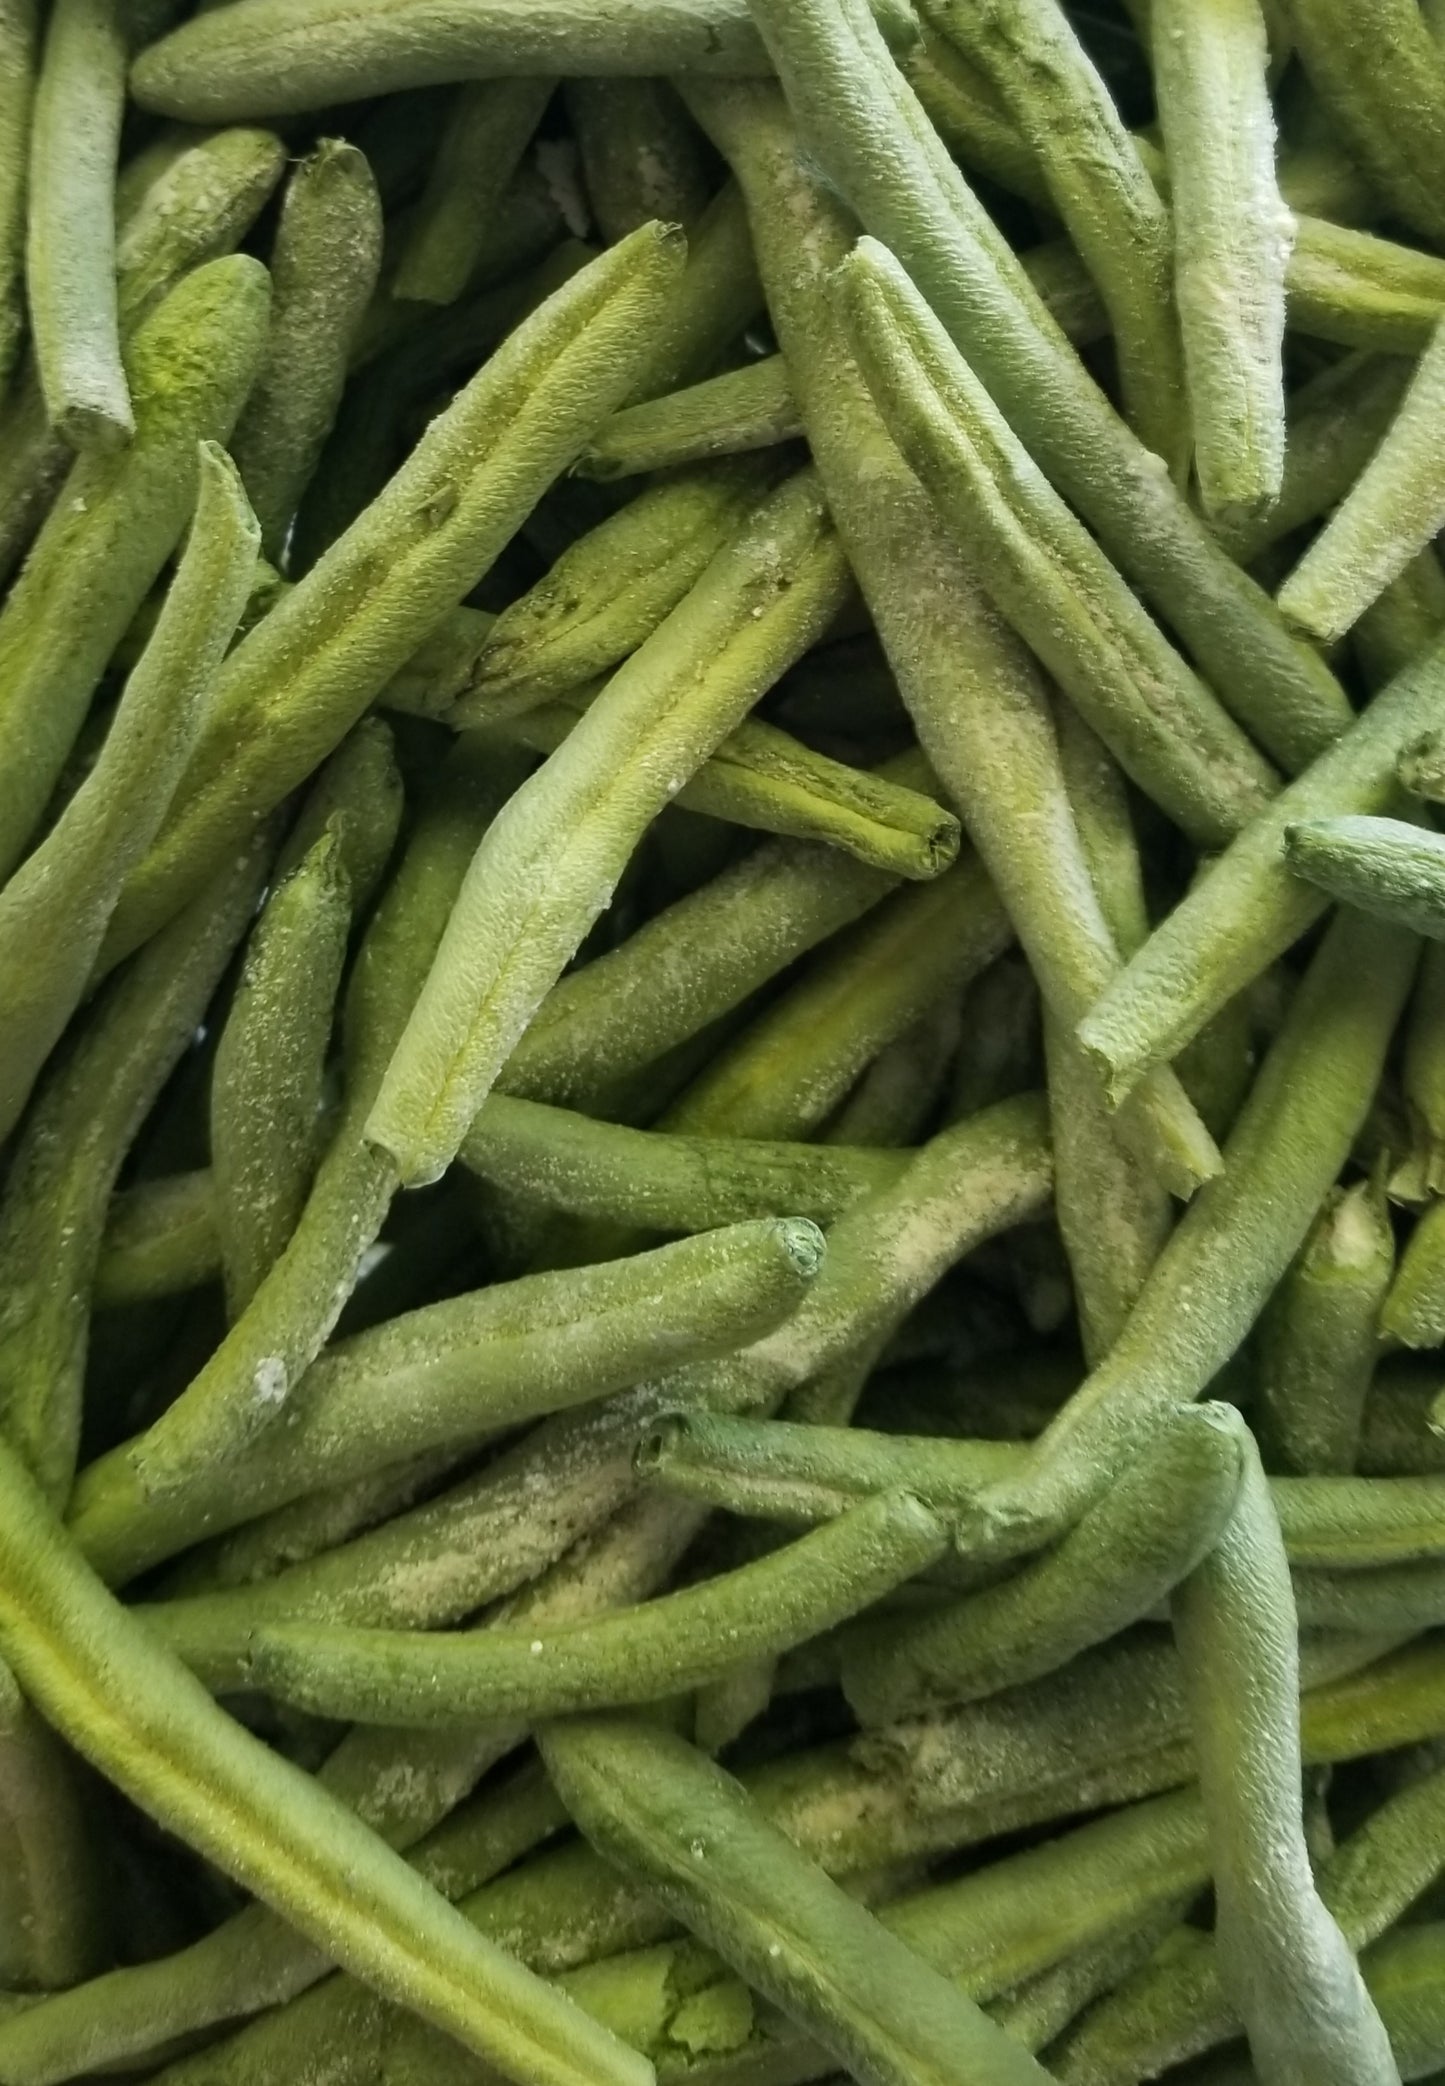 Snack Green Beans